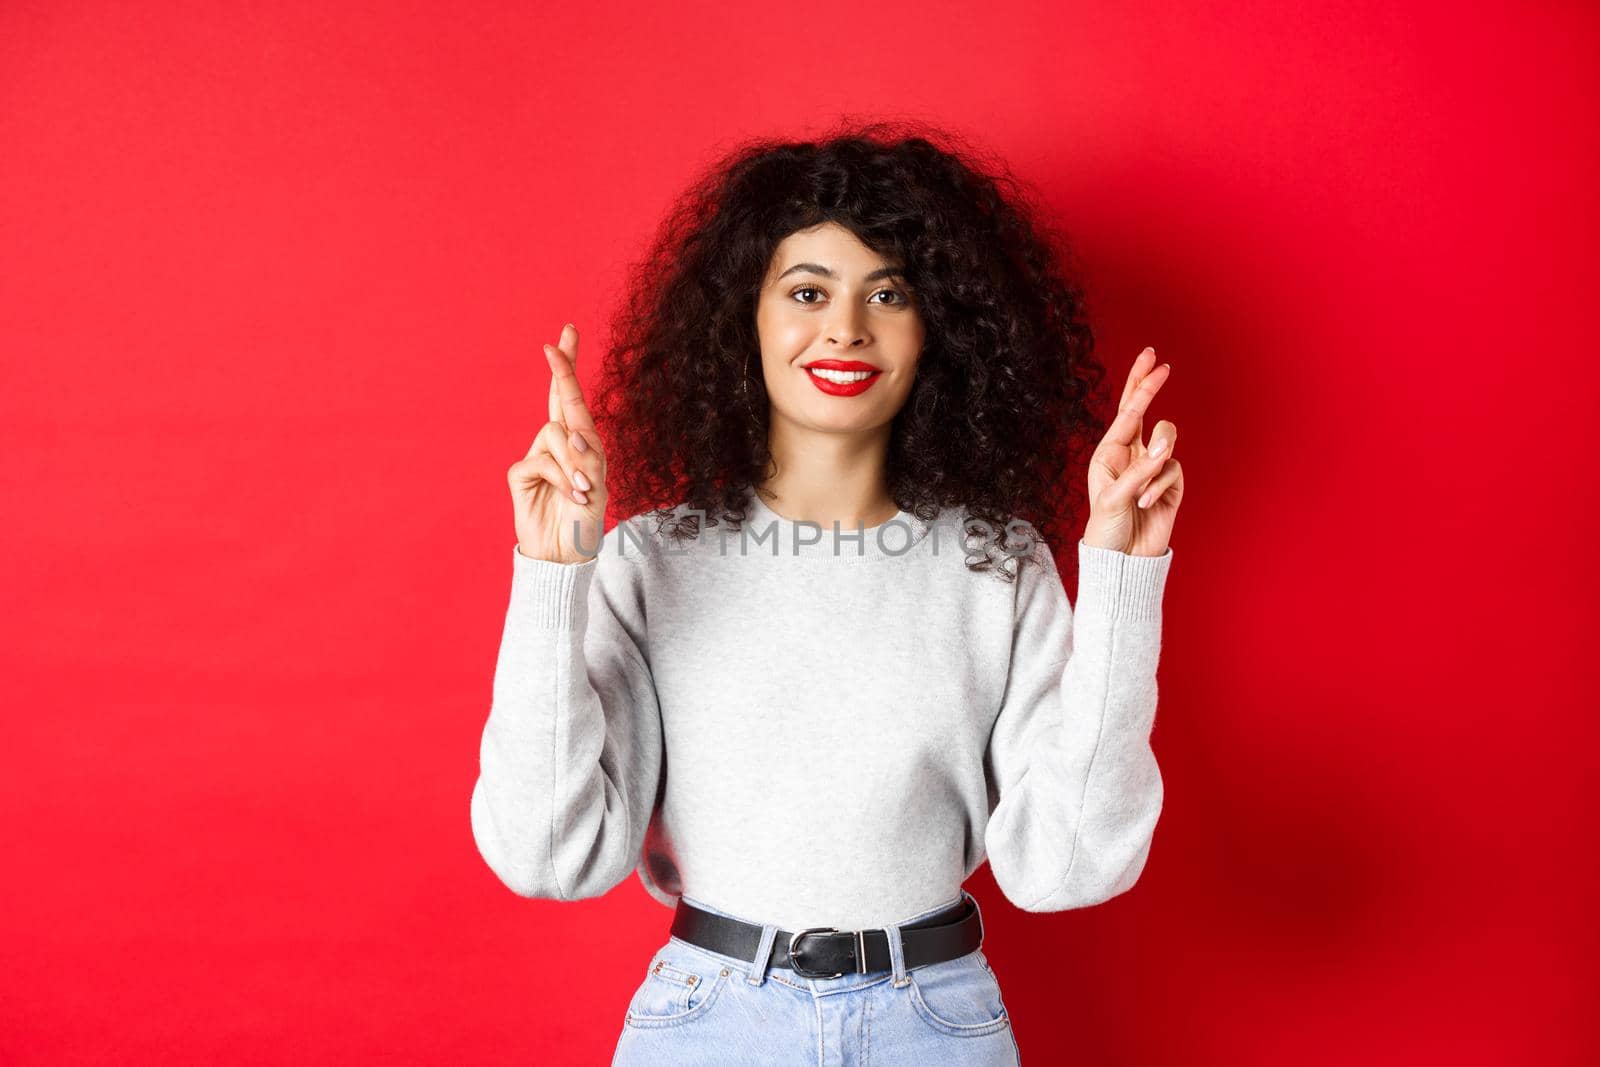 Hopeful young woman with red lips and curly hair, cross fingers for good luck and making wish, praying for dream come true, smiling excited, red background.